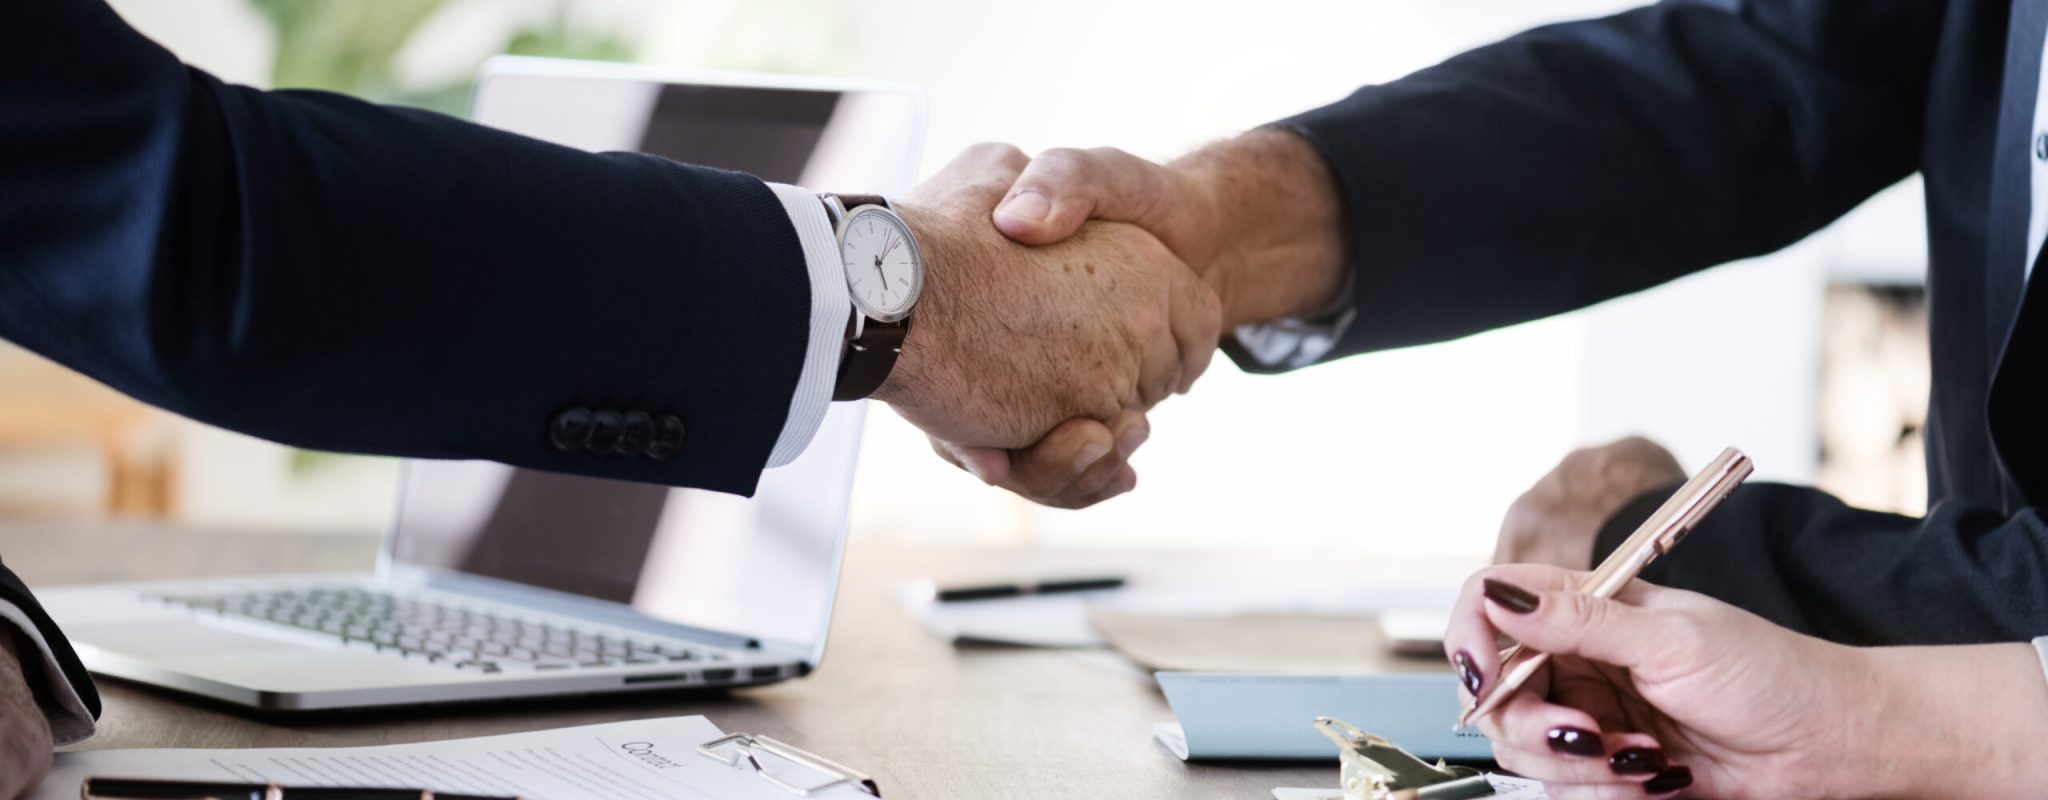 Business people shaking hands together